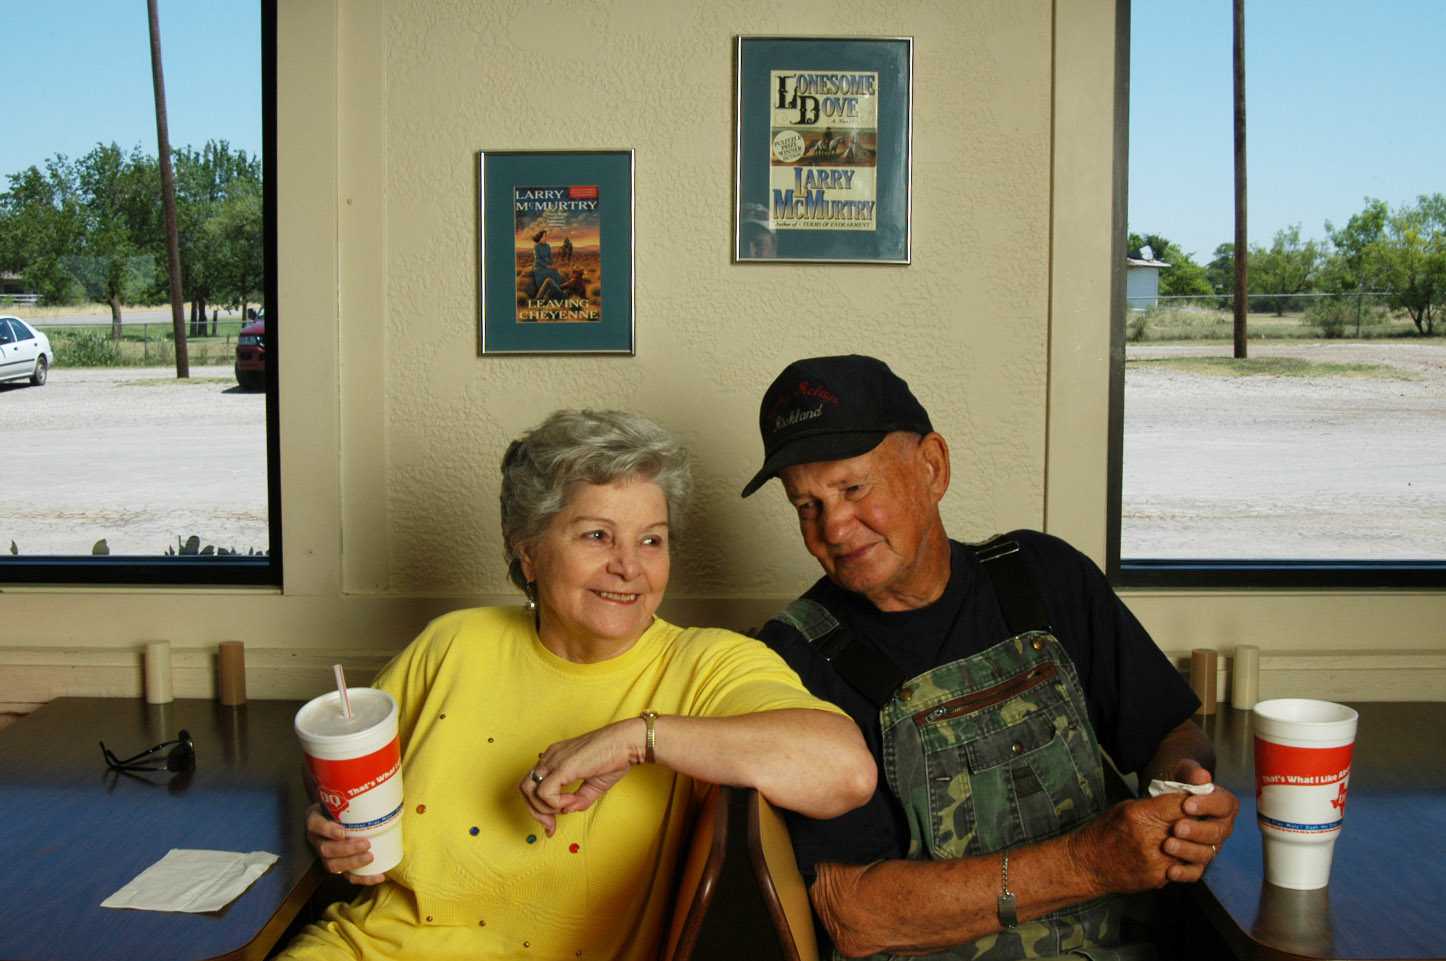 Two people sit at a Dairy Queen underneath framed covers of Lonesome Dove.